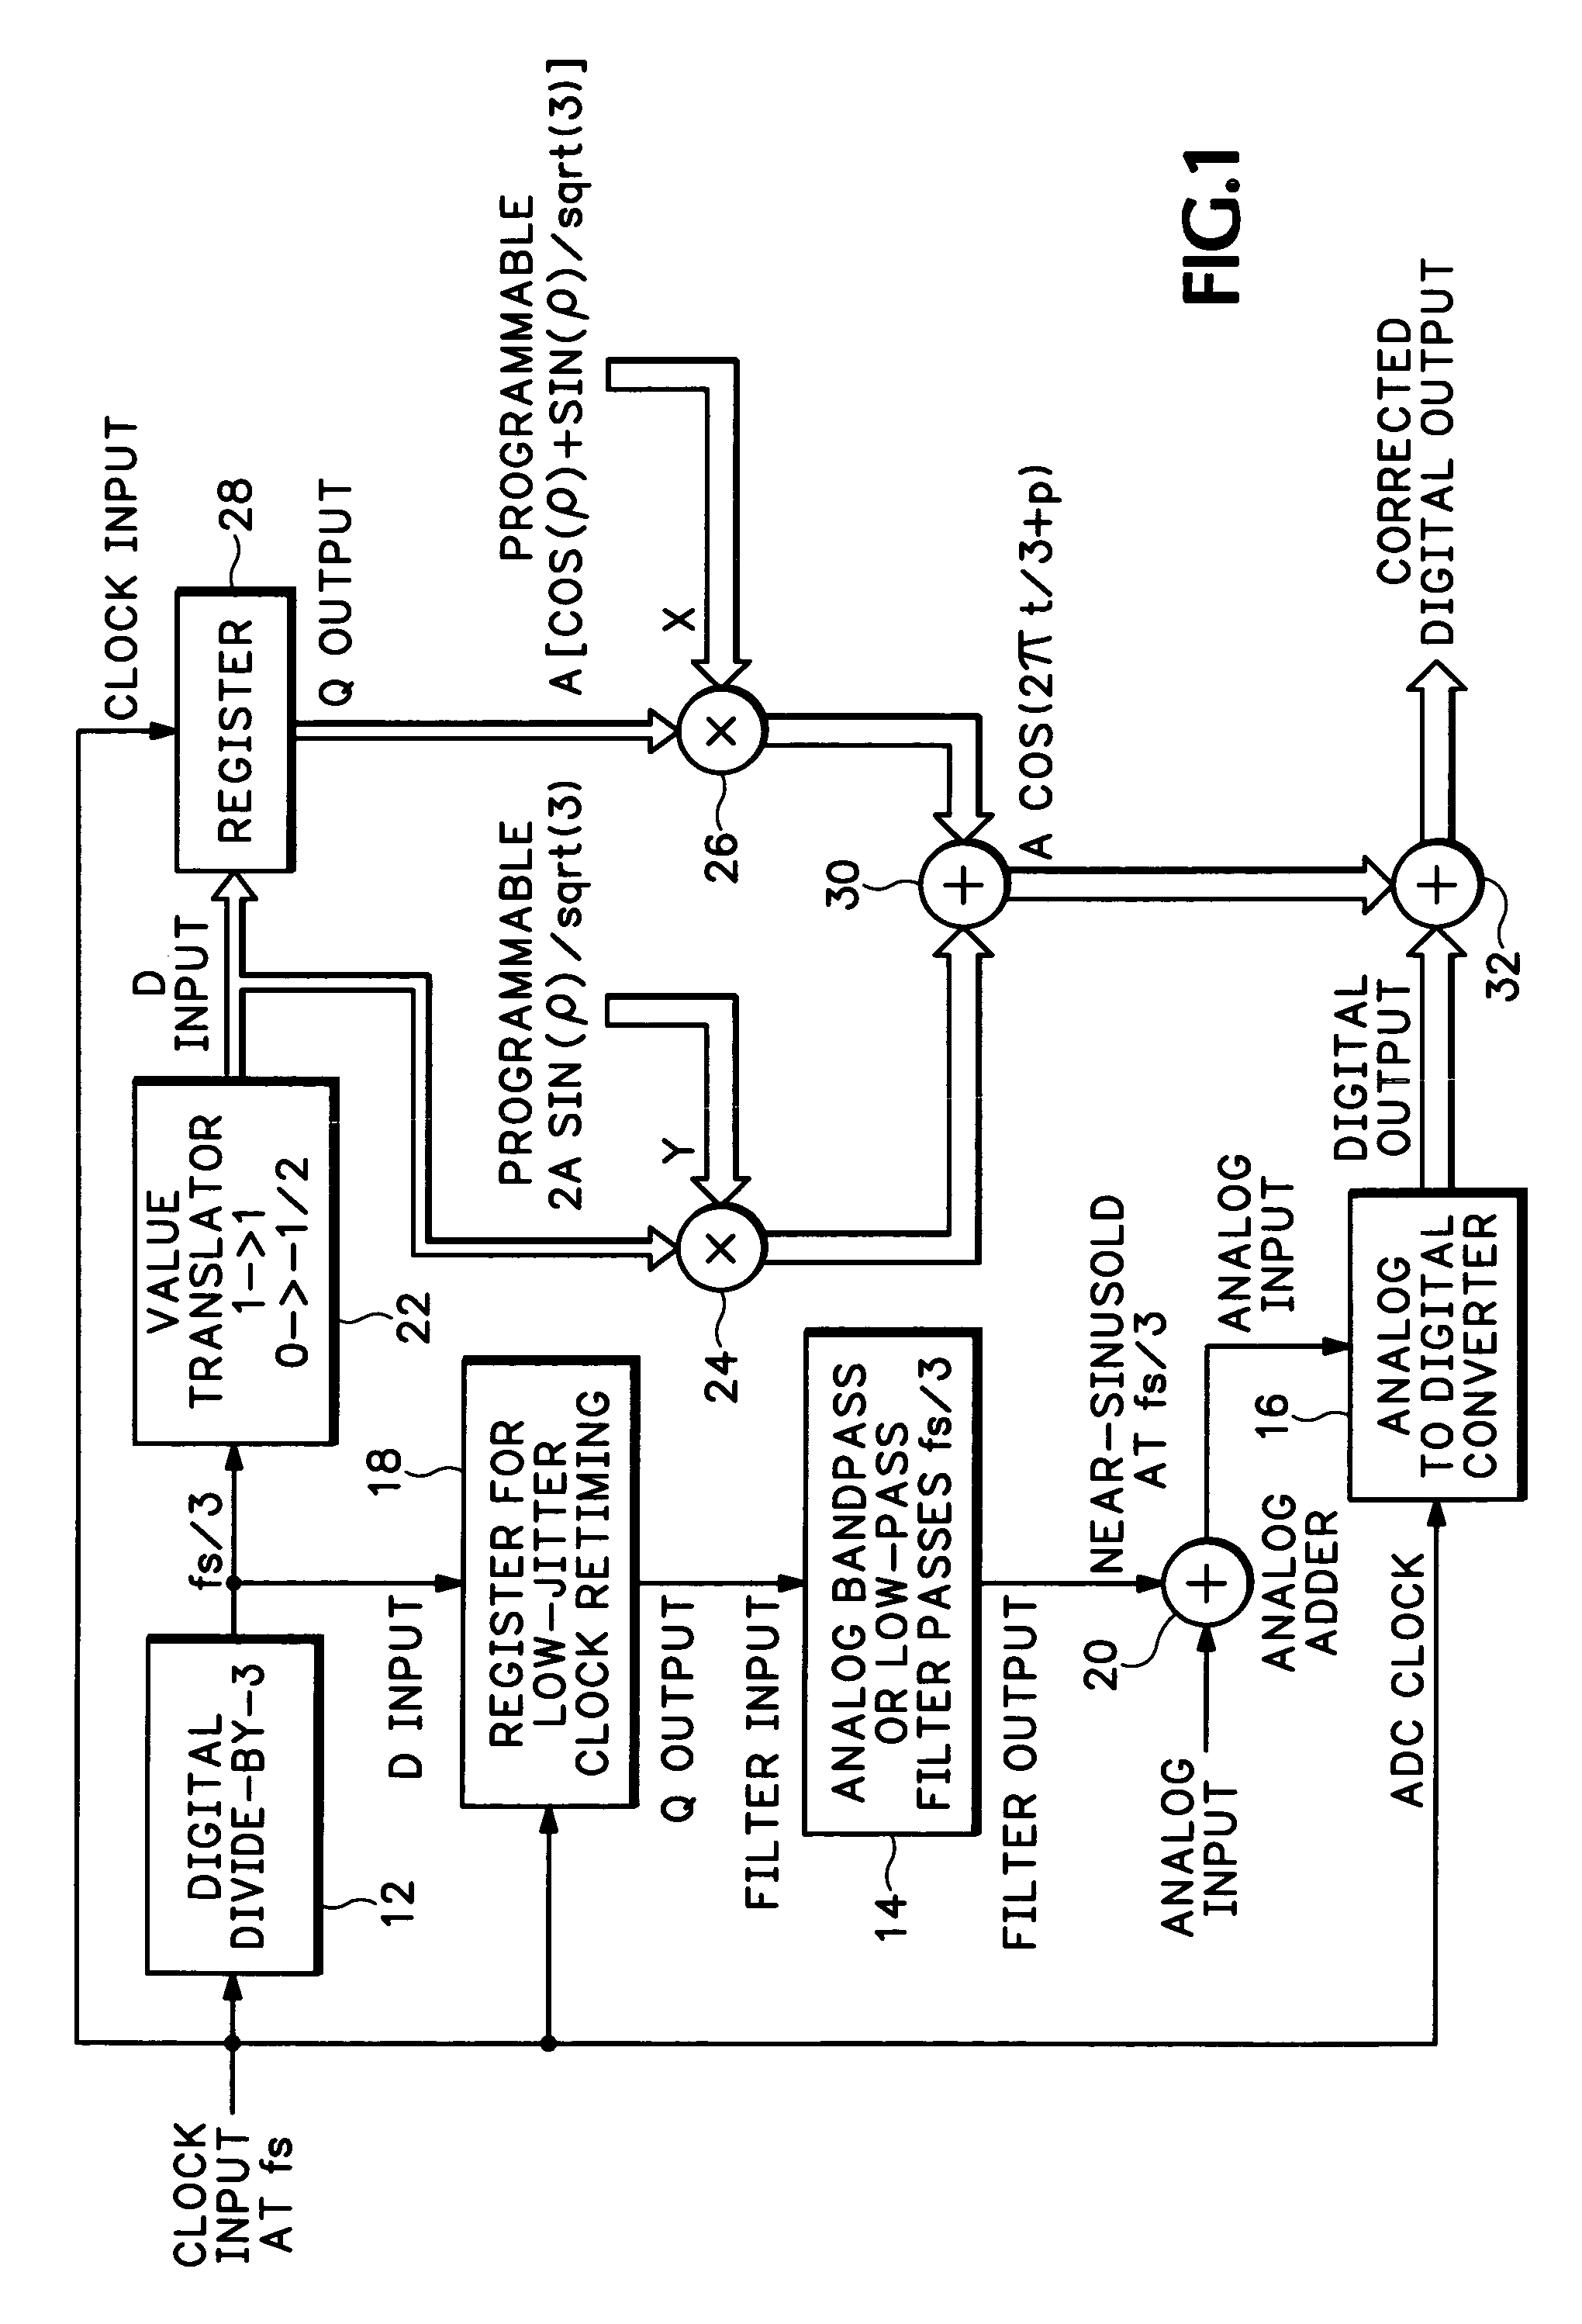 Dither system for a quantizing device